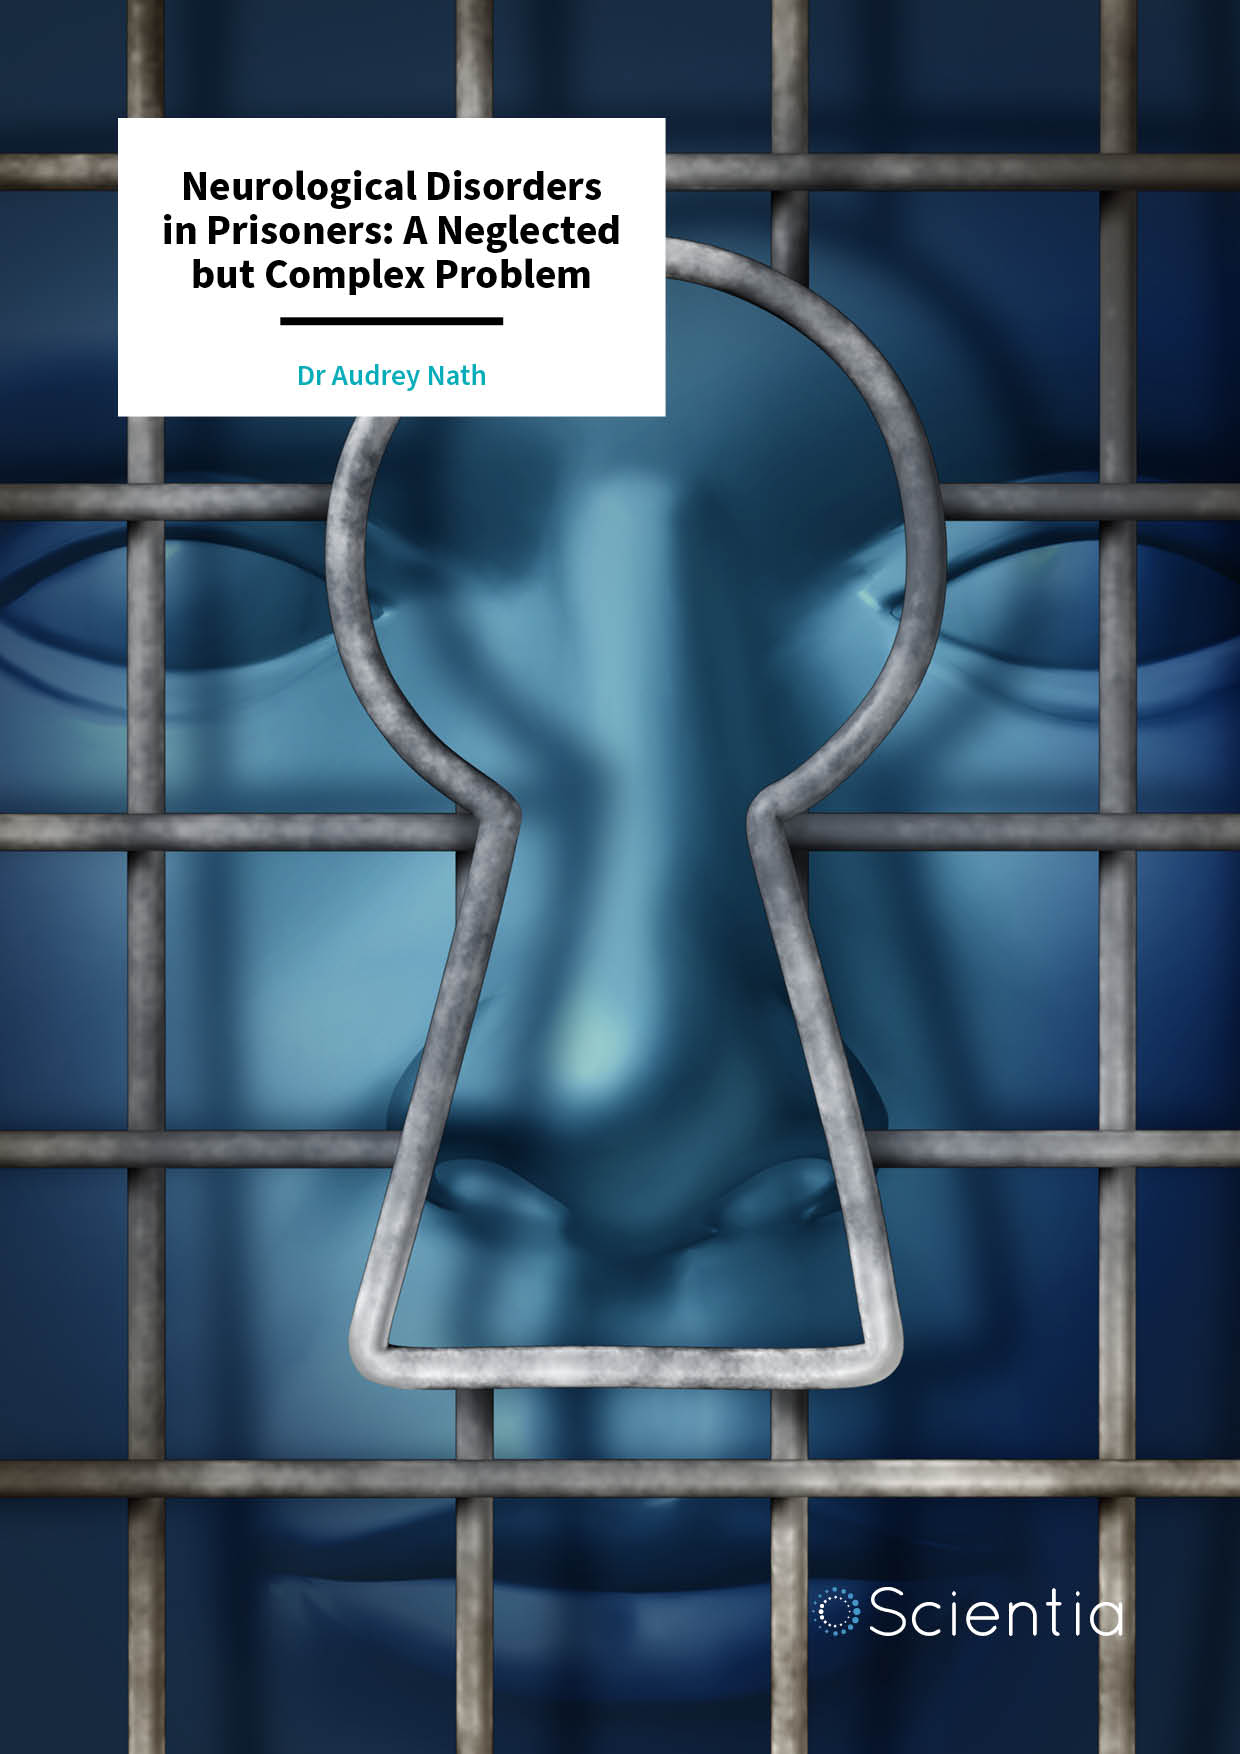 Dr Audrey Nath | Neurological Disorders in Prisoners: A Neglected but Complex Problem